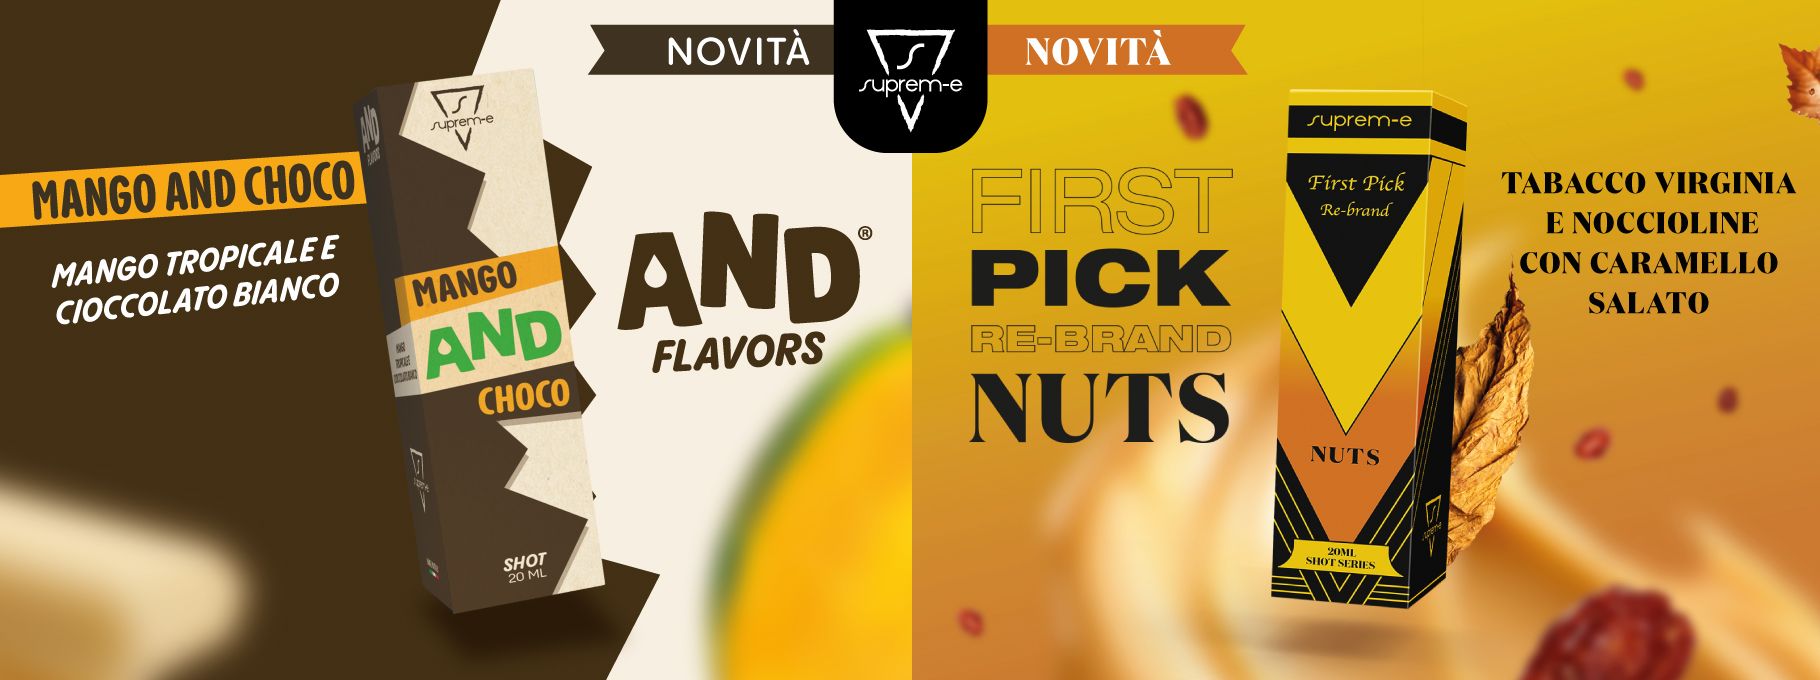 MANGO AND CHOCO + FIRST PICK RE-BRAND NUTS